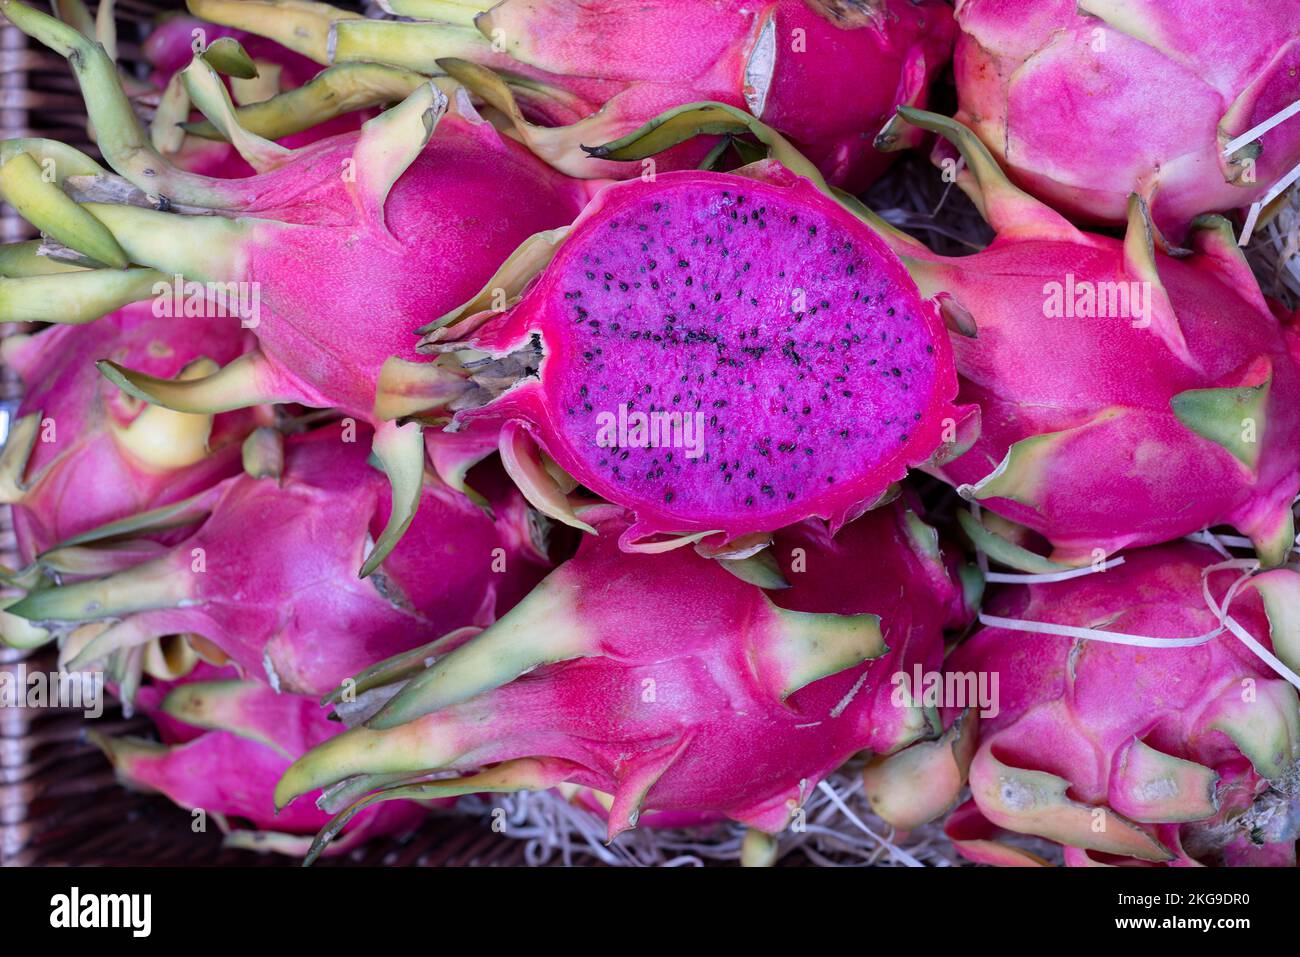 Red Dragon Fruit Hylocereus costaricensis or pitahaya a tropical fruit. The fruits, one cut in half, are for sale in an English fresh produce market Stock Photo